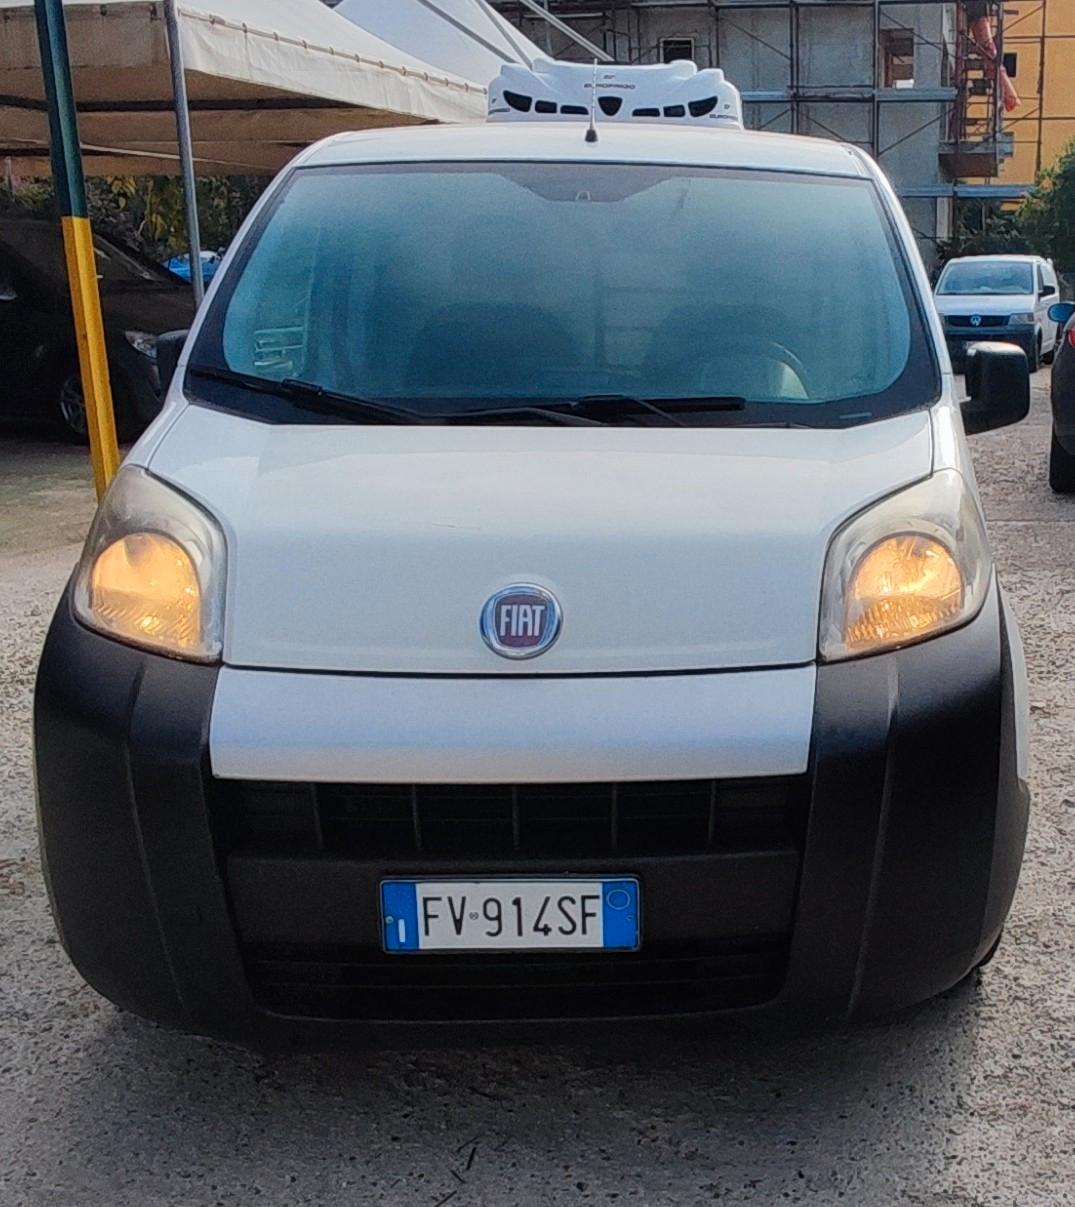 Fiat Bussiness